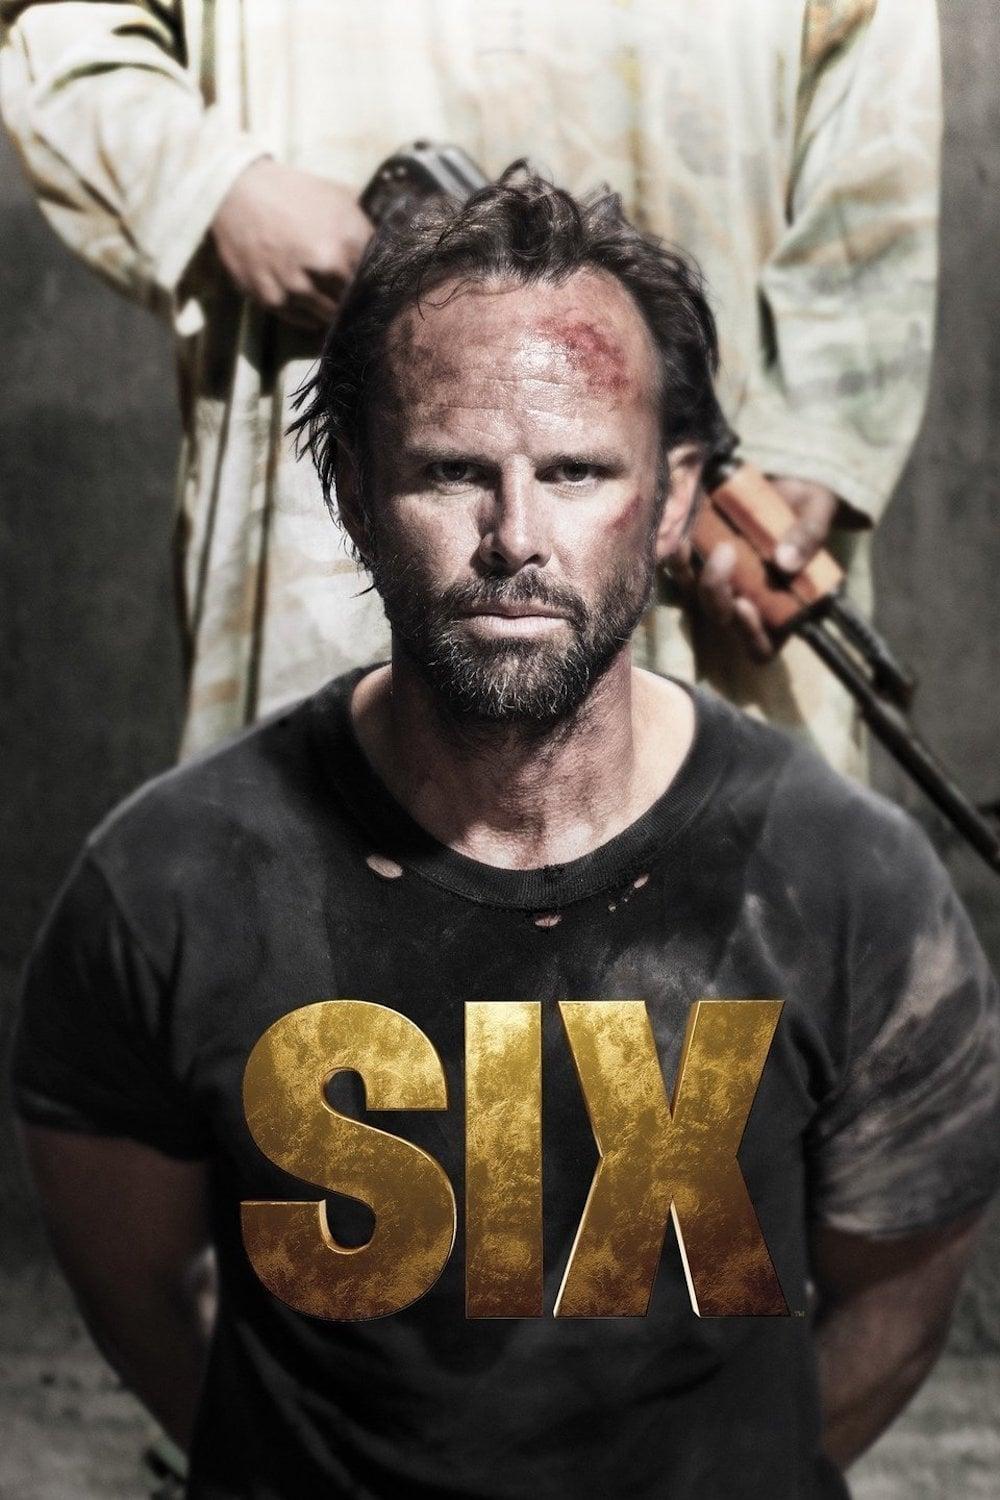 SIX poster